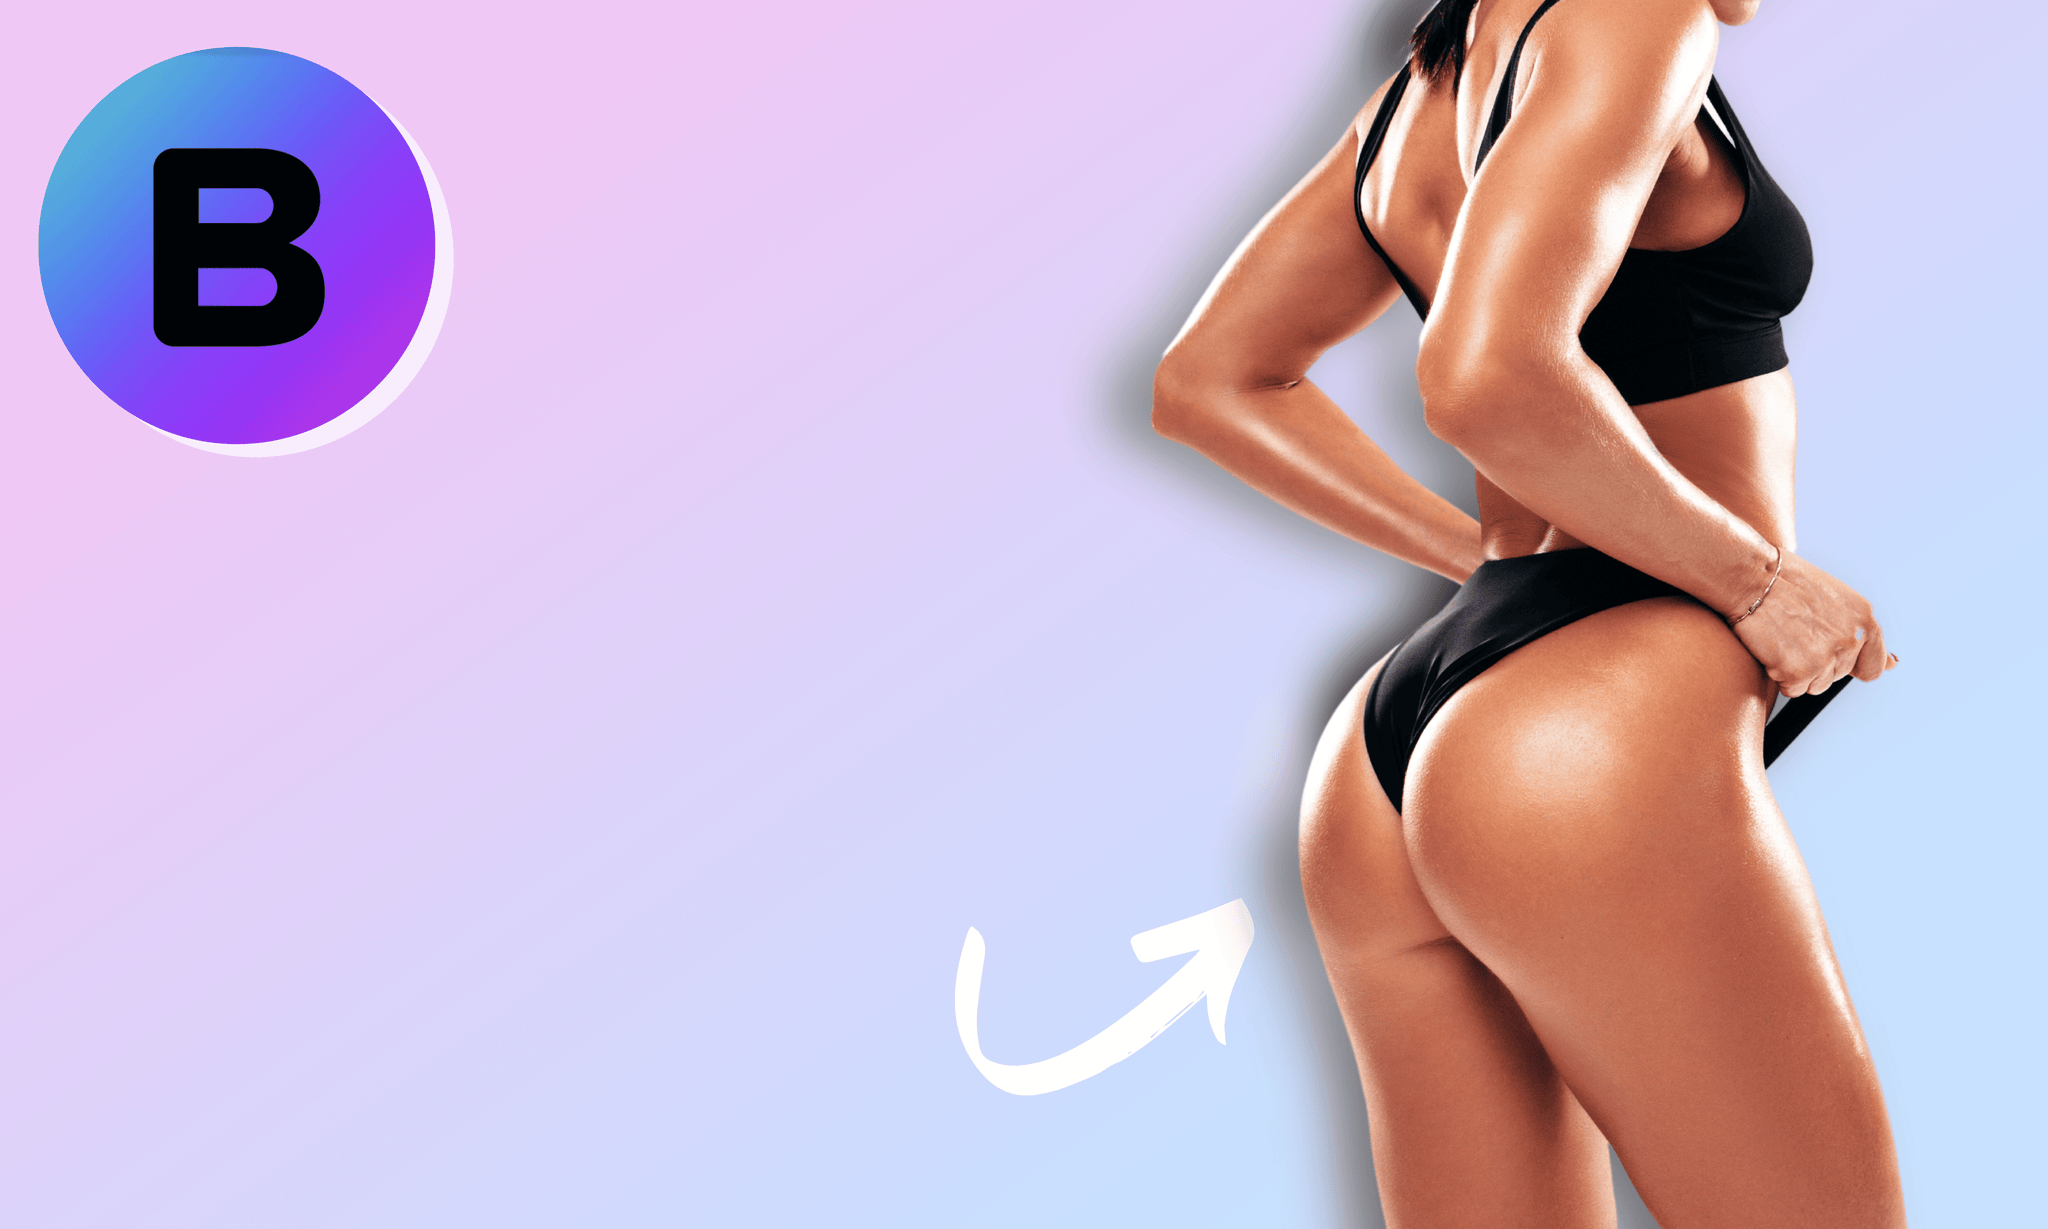 Here are the Best Cellulite Treatments